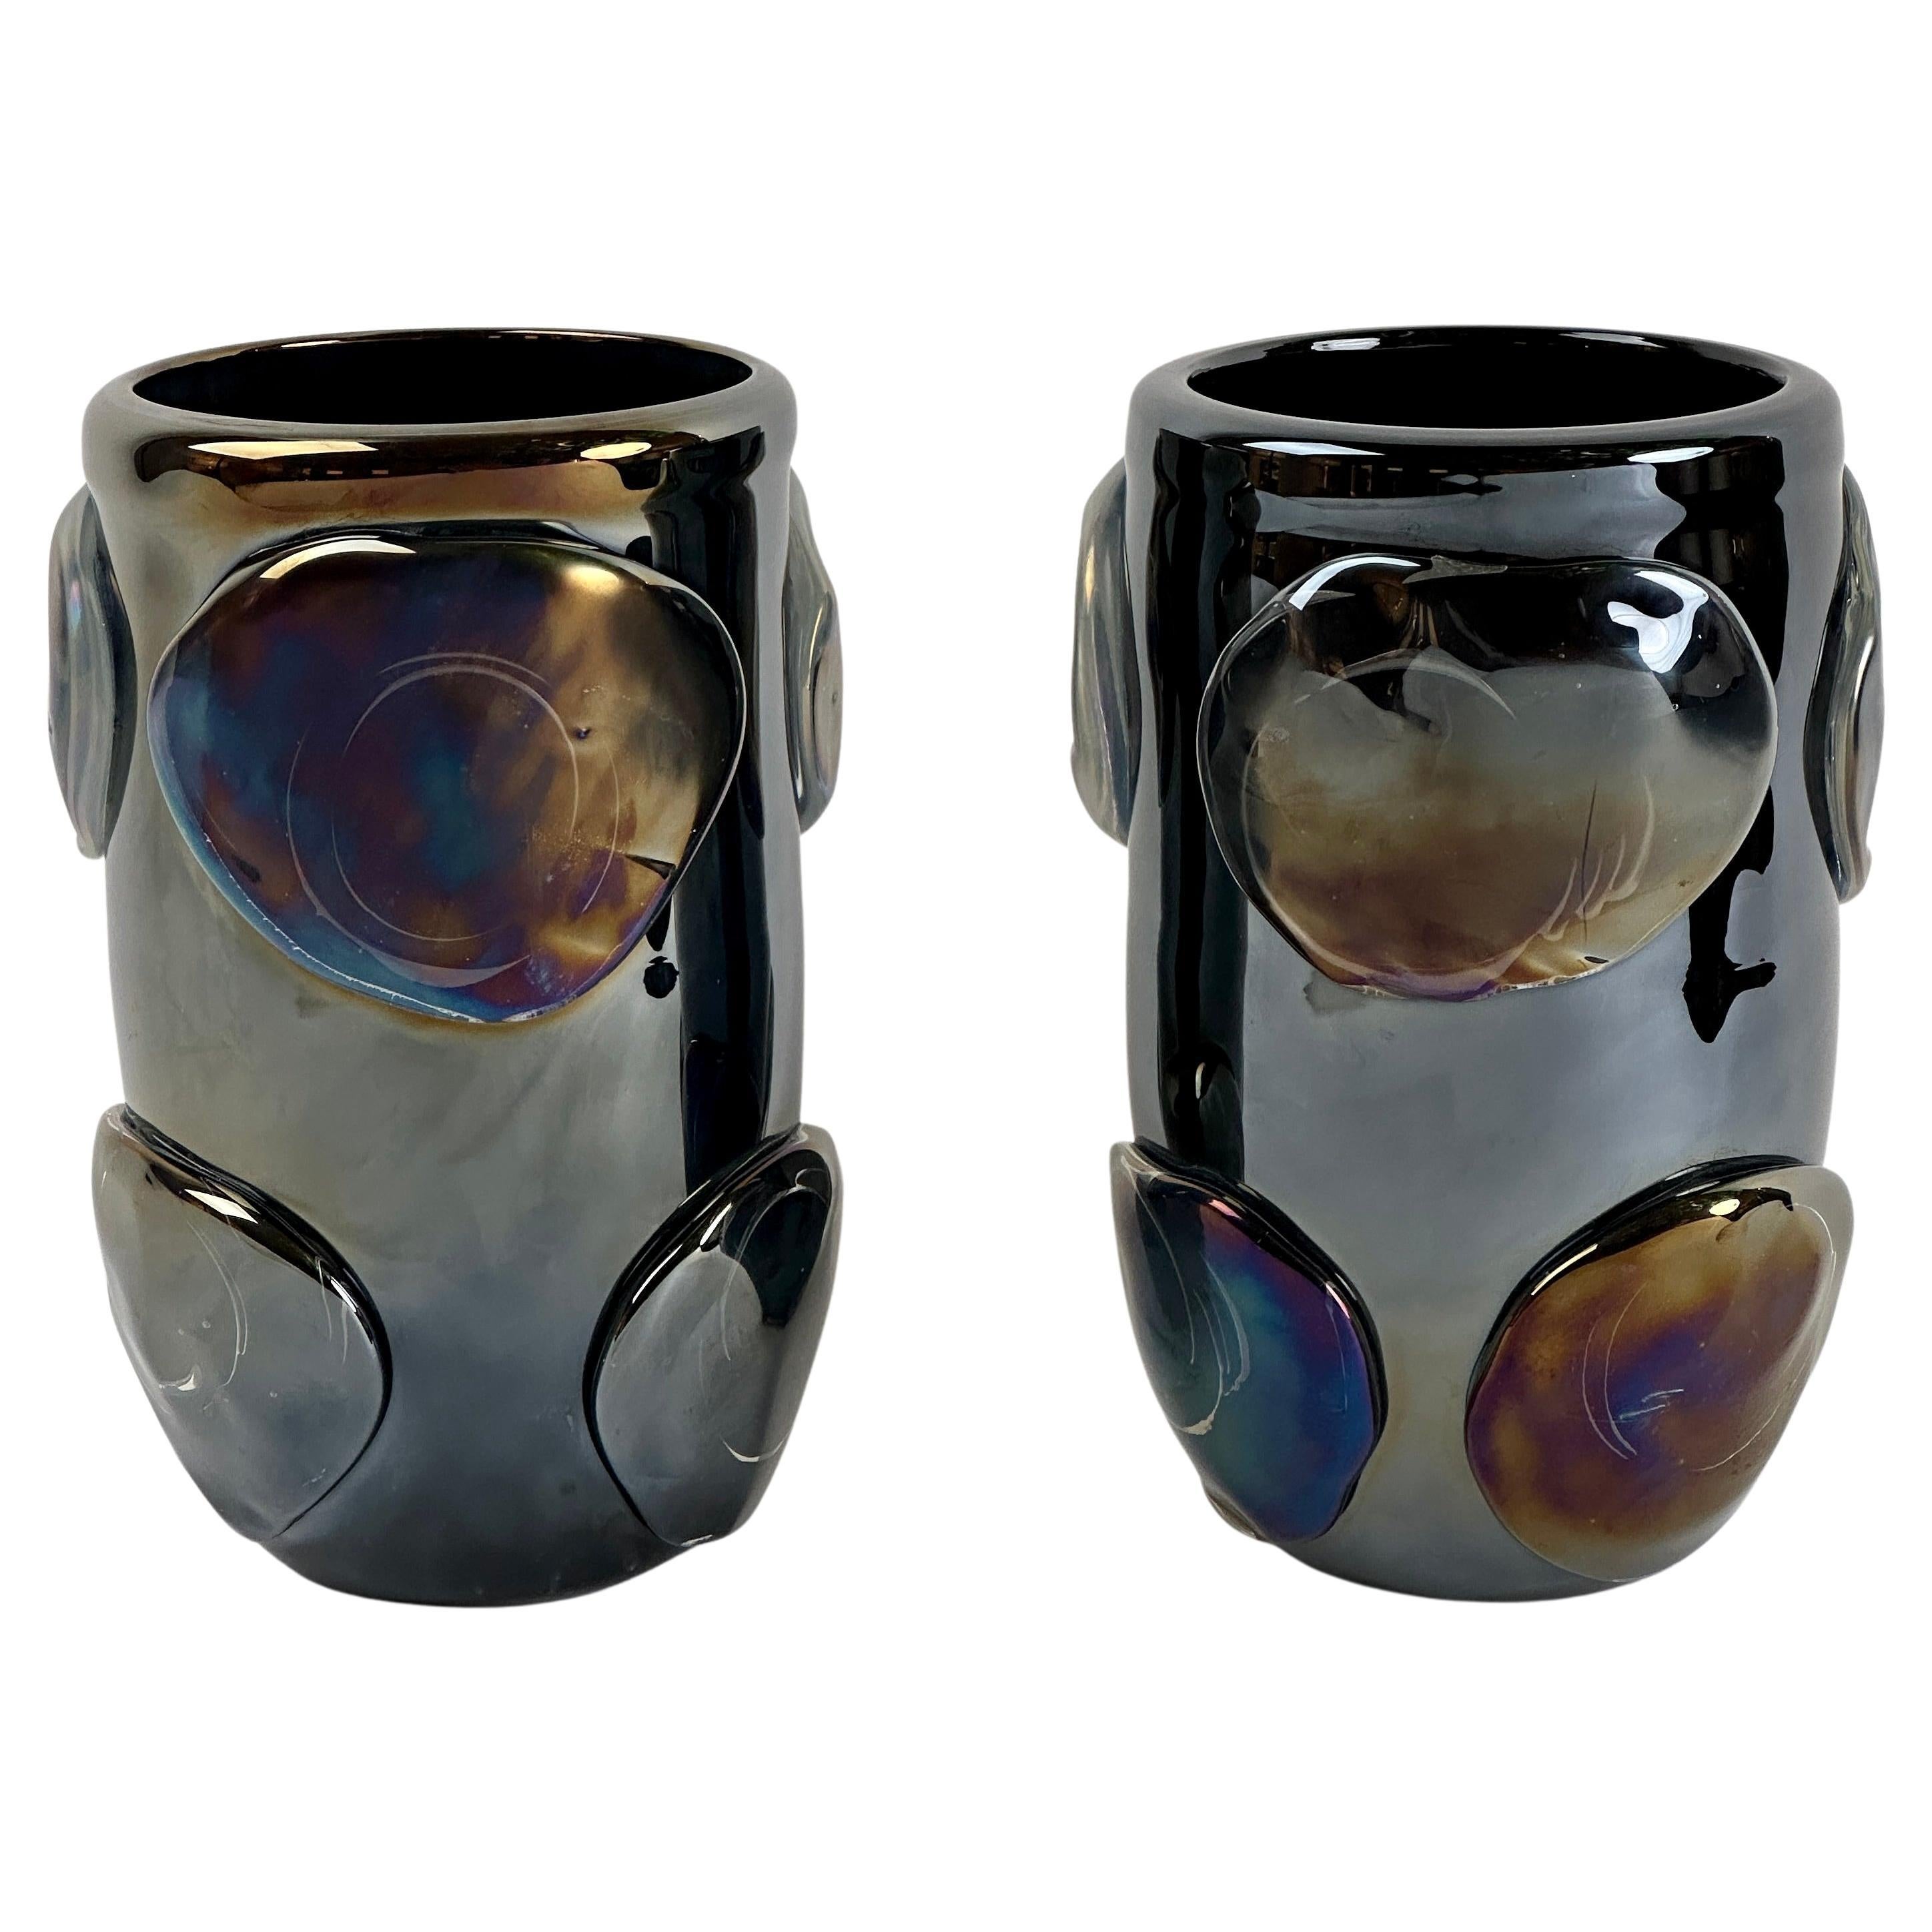 Pair of Vintage Black Iridescent Murano Art Glass Vases by Costantini